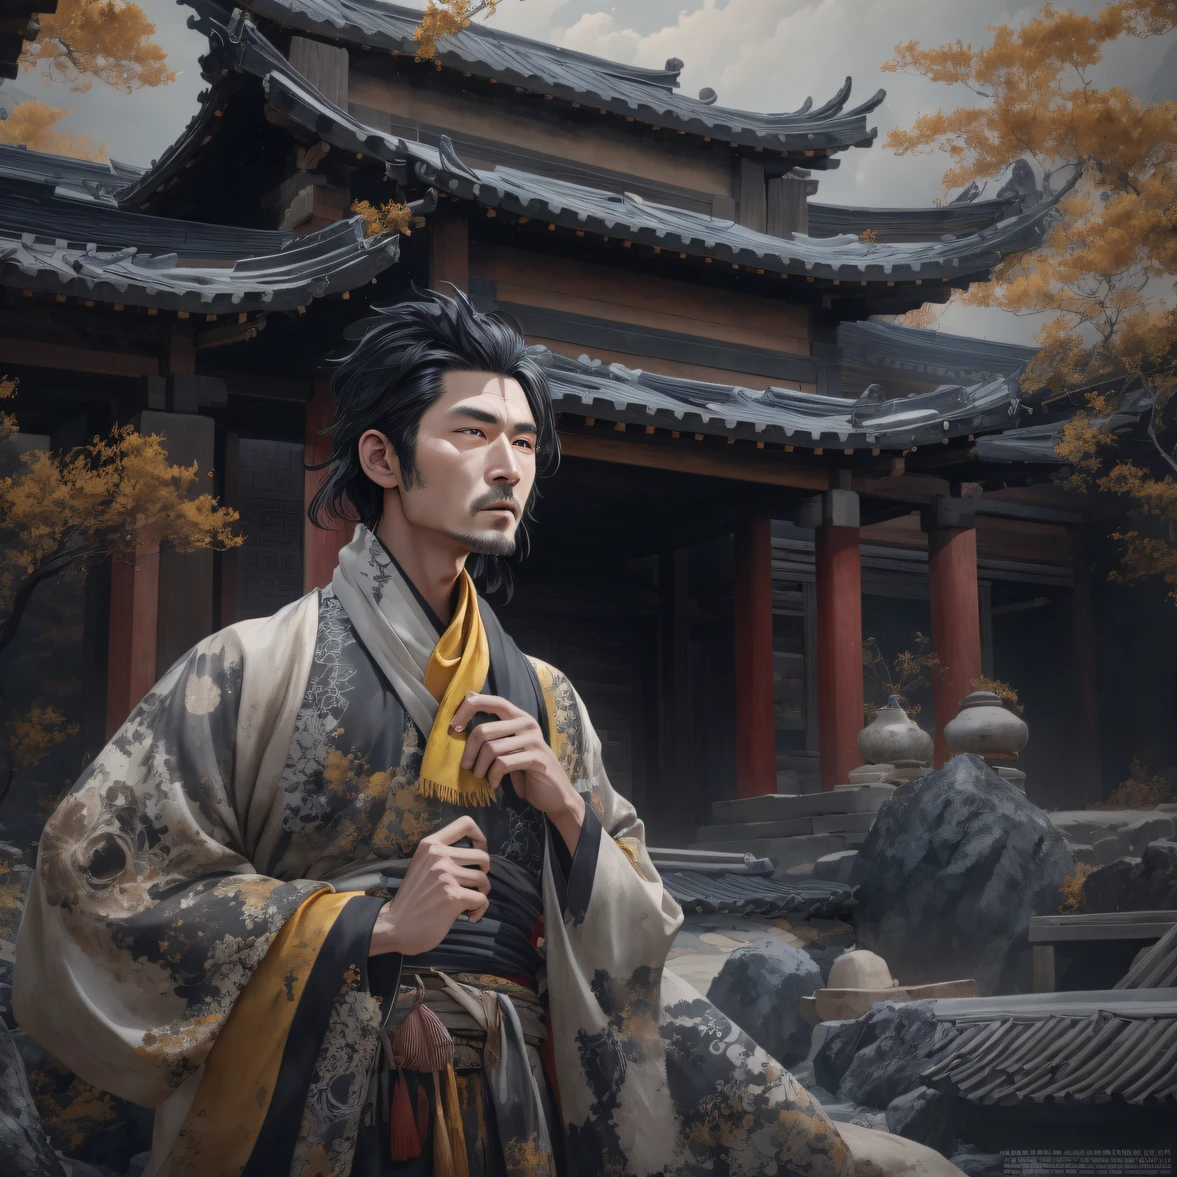 Side 32K，exteriors，Roof，People are small（tmasterpiece，k hd，hyper HD，32K）Long flowing glossy black hair，Tang dynasty complex，zydink， a color，mid afternoon（canyons）， （Linen batik scarf）， Combat posture， looking at the ground， Linen bandana， Chinese python pattern long-sleeved garment， Morning（Abstract gouache splash：1.2）， Dark clouds lightning background，sprinkling（realisticlying：1.4），Black color hair，The dust is blowing，Background fog， A high resolution， the detail， RAW photogr， Sharp Re， Nikon D850 Film Stock Photo by Jefferies Lee 4 Kodak Portra 400 Camera F1.6 shots, Rich colors, ultra-realistic vivid textures, Dramatic lighting, Unreal Engine Art Station Trend, cinestir 800，Flowing and shiny black hair,（（（National style building）））Full-body side